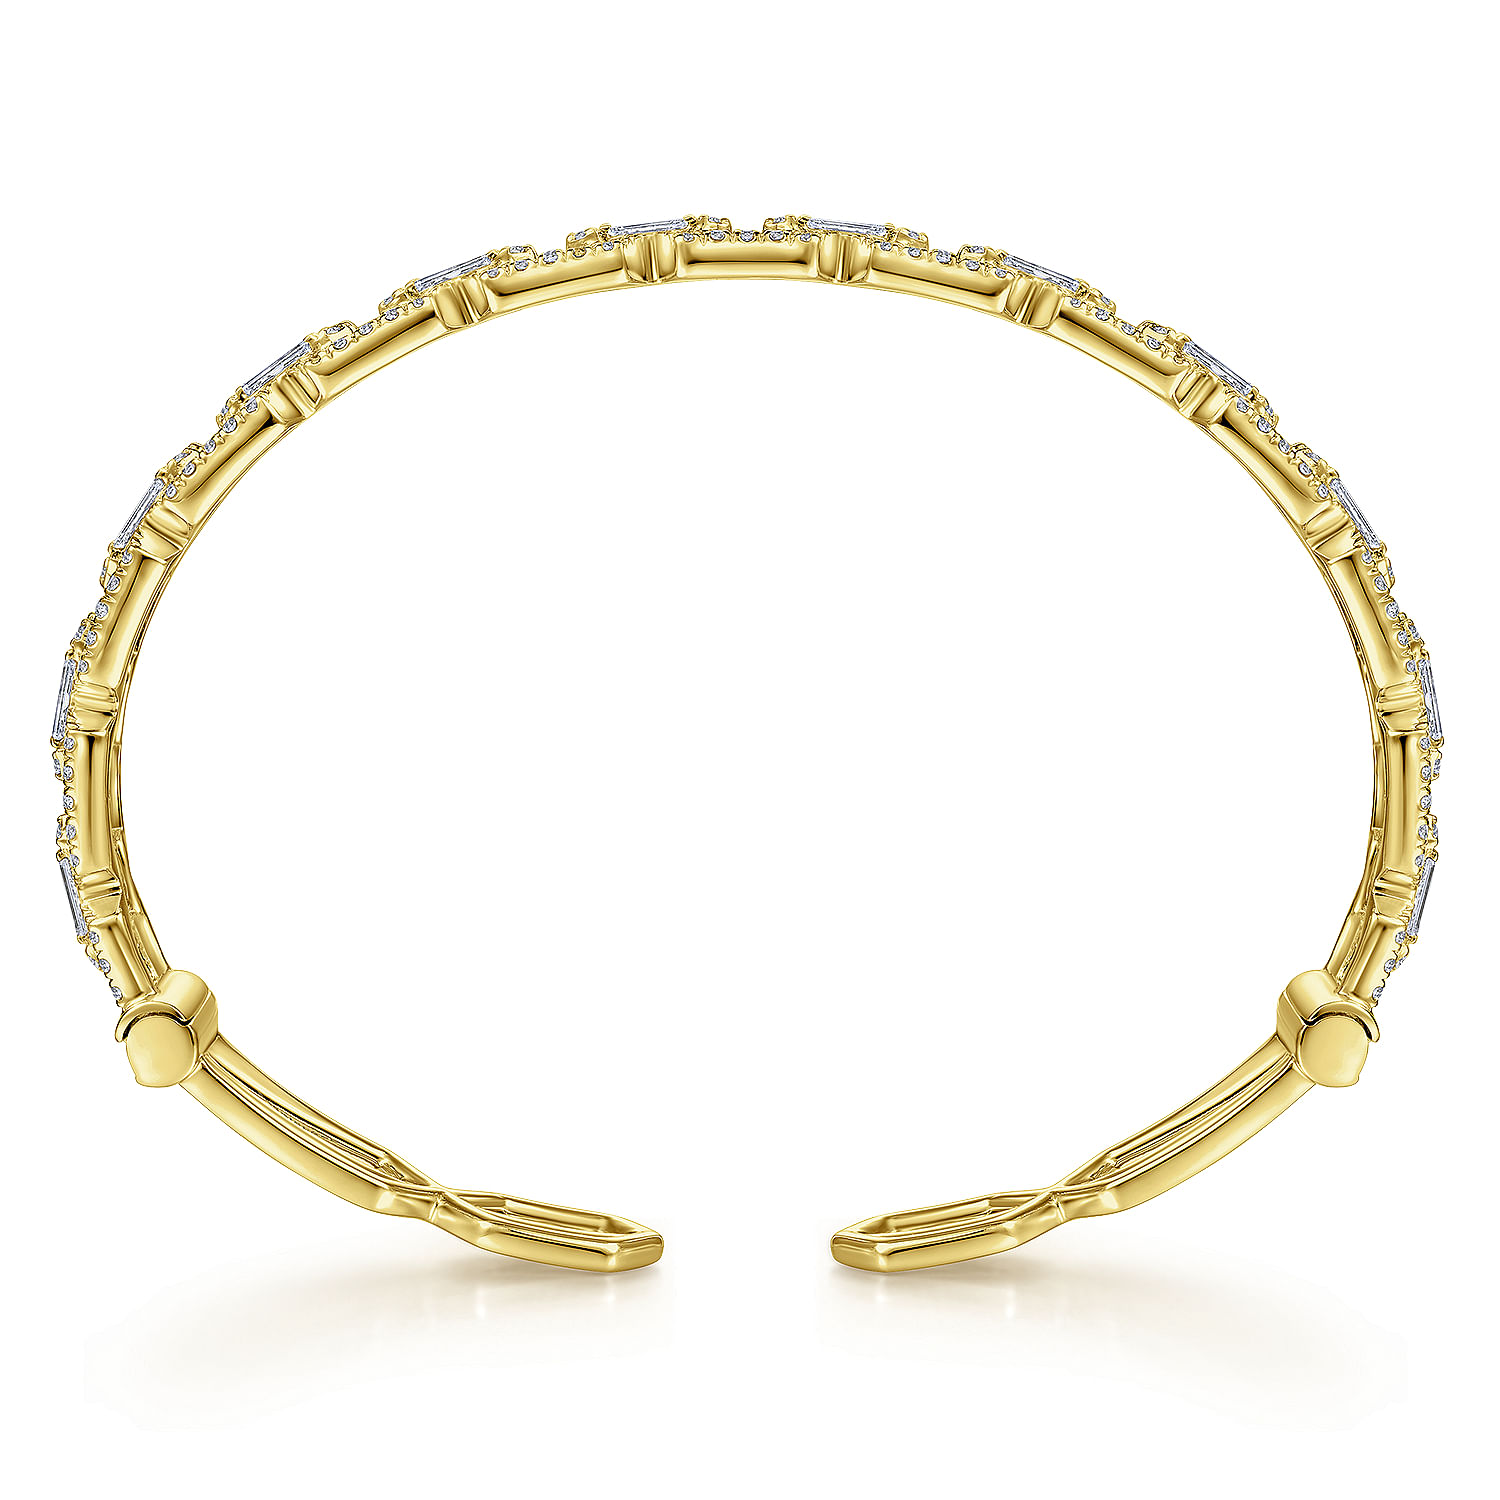 14K Yellow Gold Diamond Chain Link Cuff Bracelet with Diamond Baguette Spacers